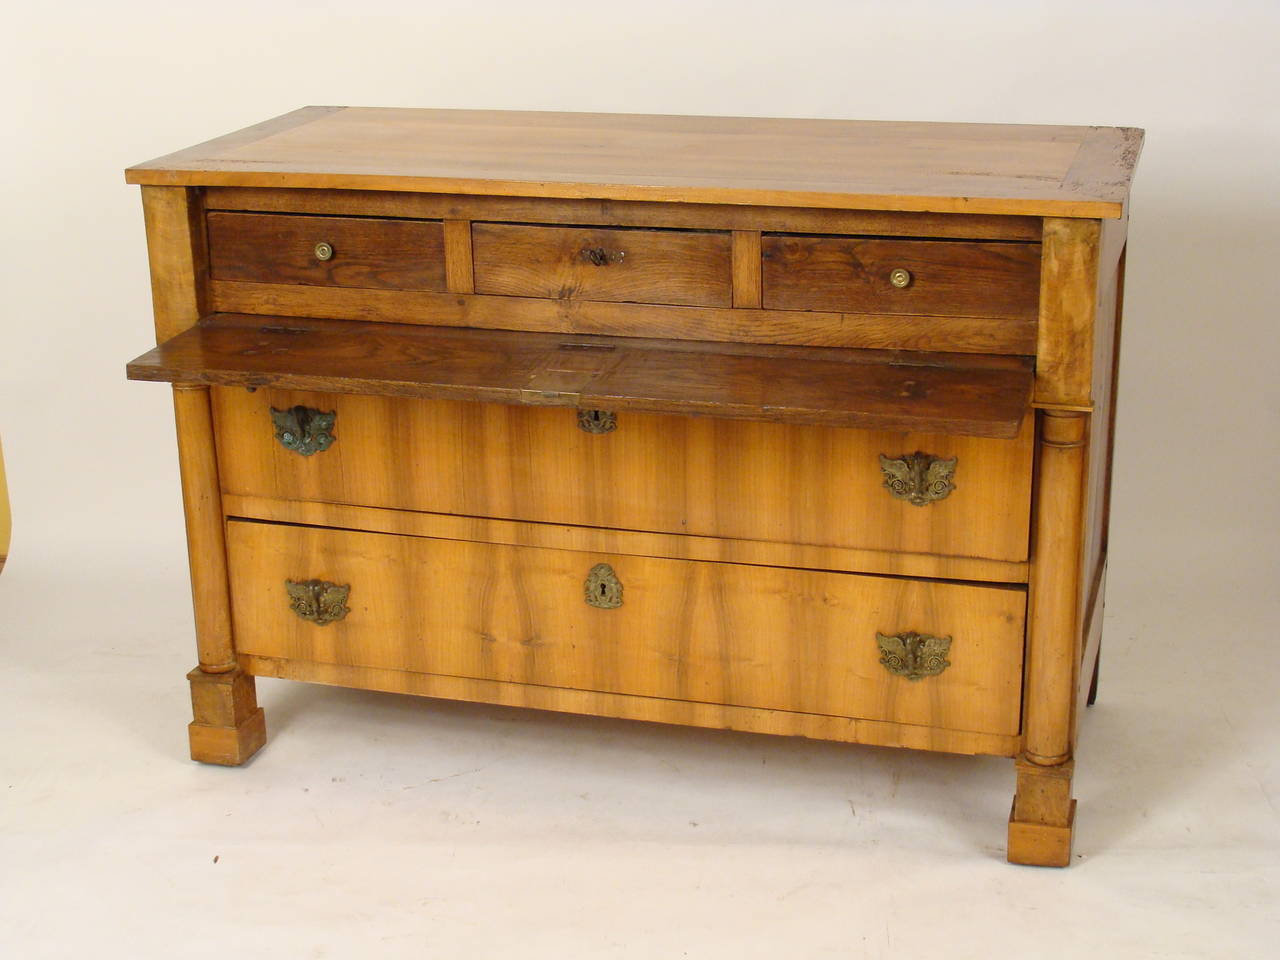 Continental Empire walnut and burl walnut chest of drawers or desk, circa 1825.